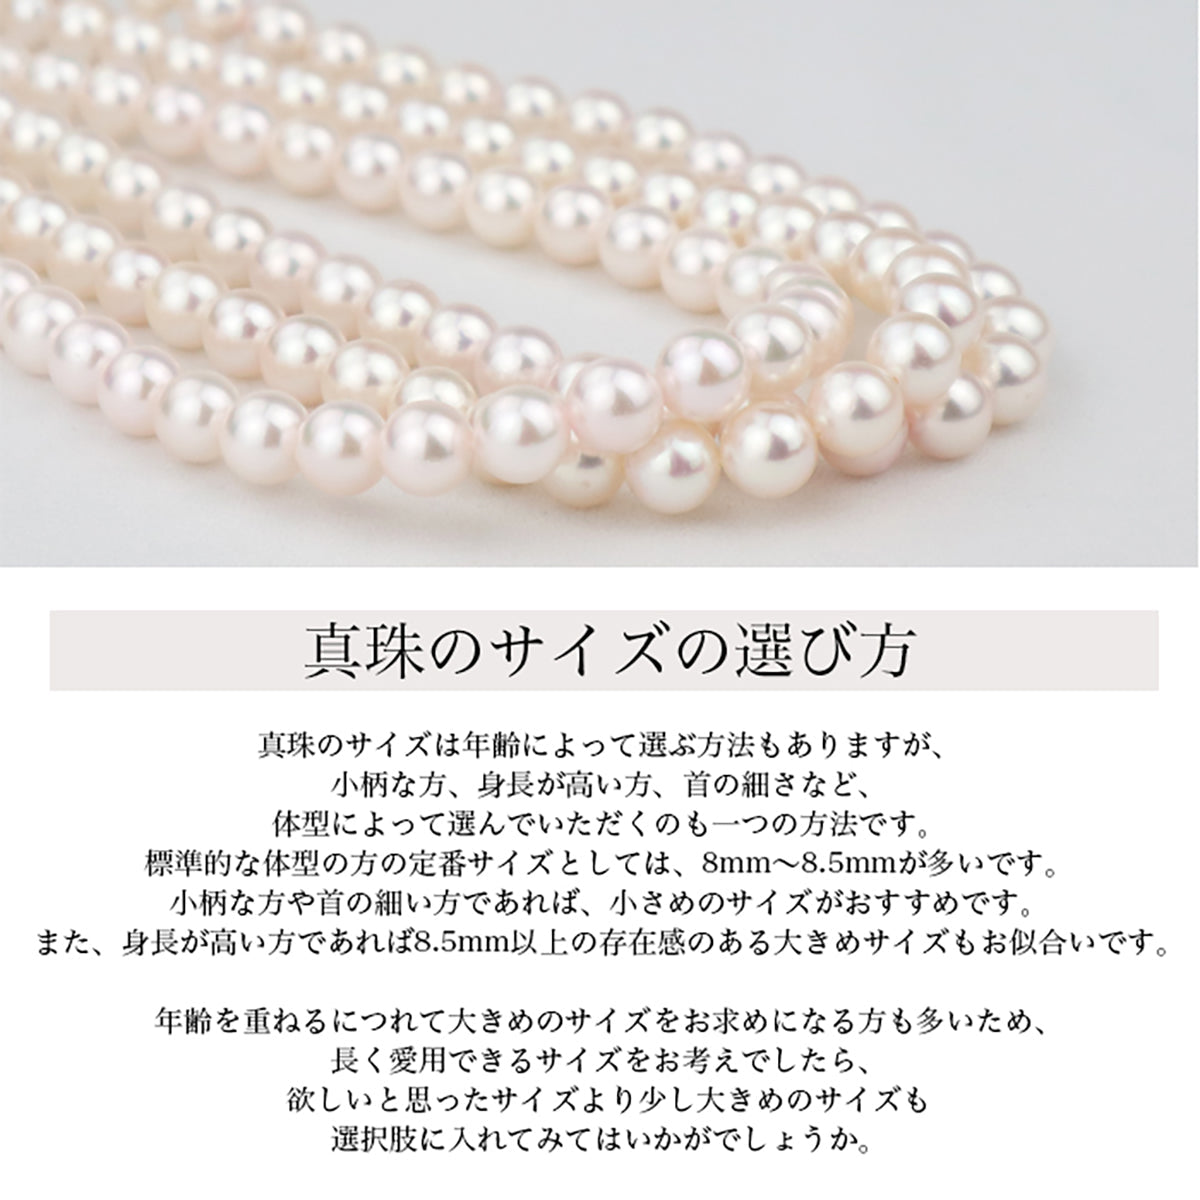 Hanadama Pearl Formal Necklace Set of 2 [7.5-8.0mm] (Earrings Included) Formal Set with Certificate of Authenticity and Storage Case for Ceremonial Occasions